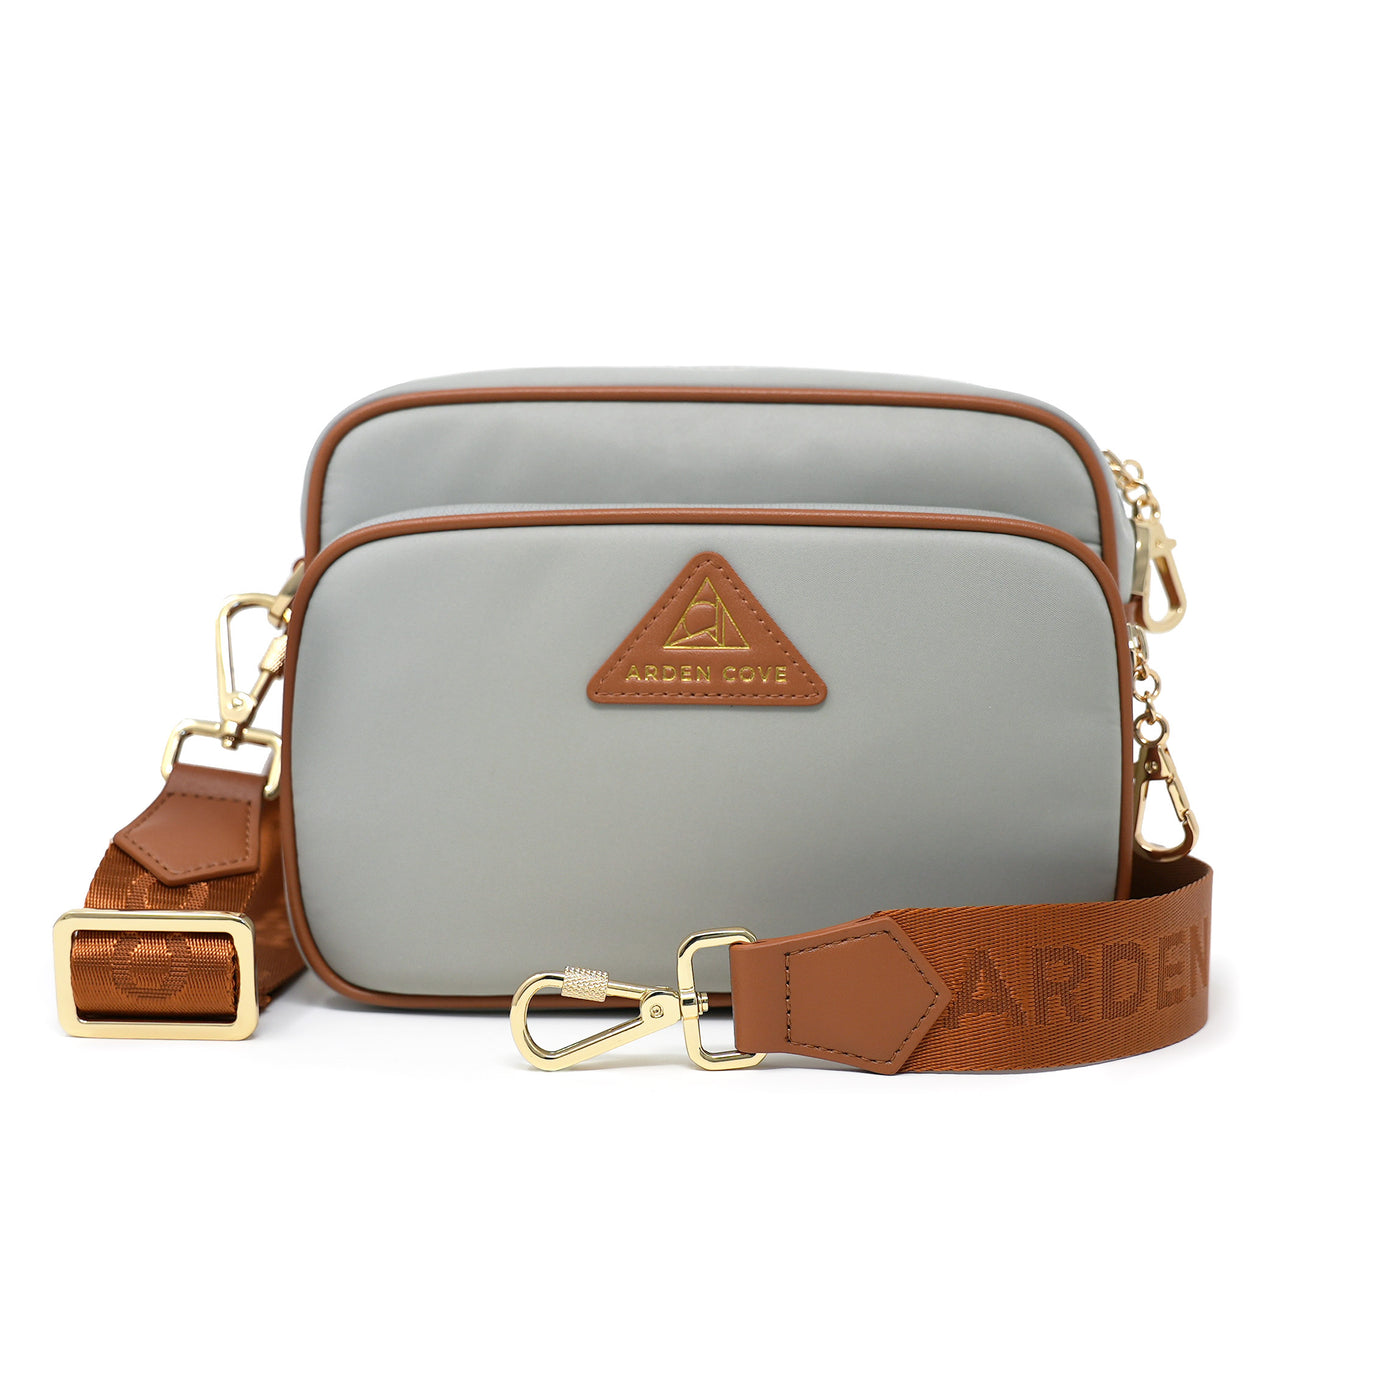 Anti-theft Water-resistant Travel Crossbody - Crissy Full Crossbody in Light Grey Gold with nylon jacquard locking clasps straps - front view - Arden Cove